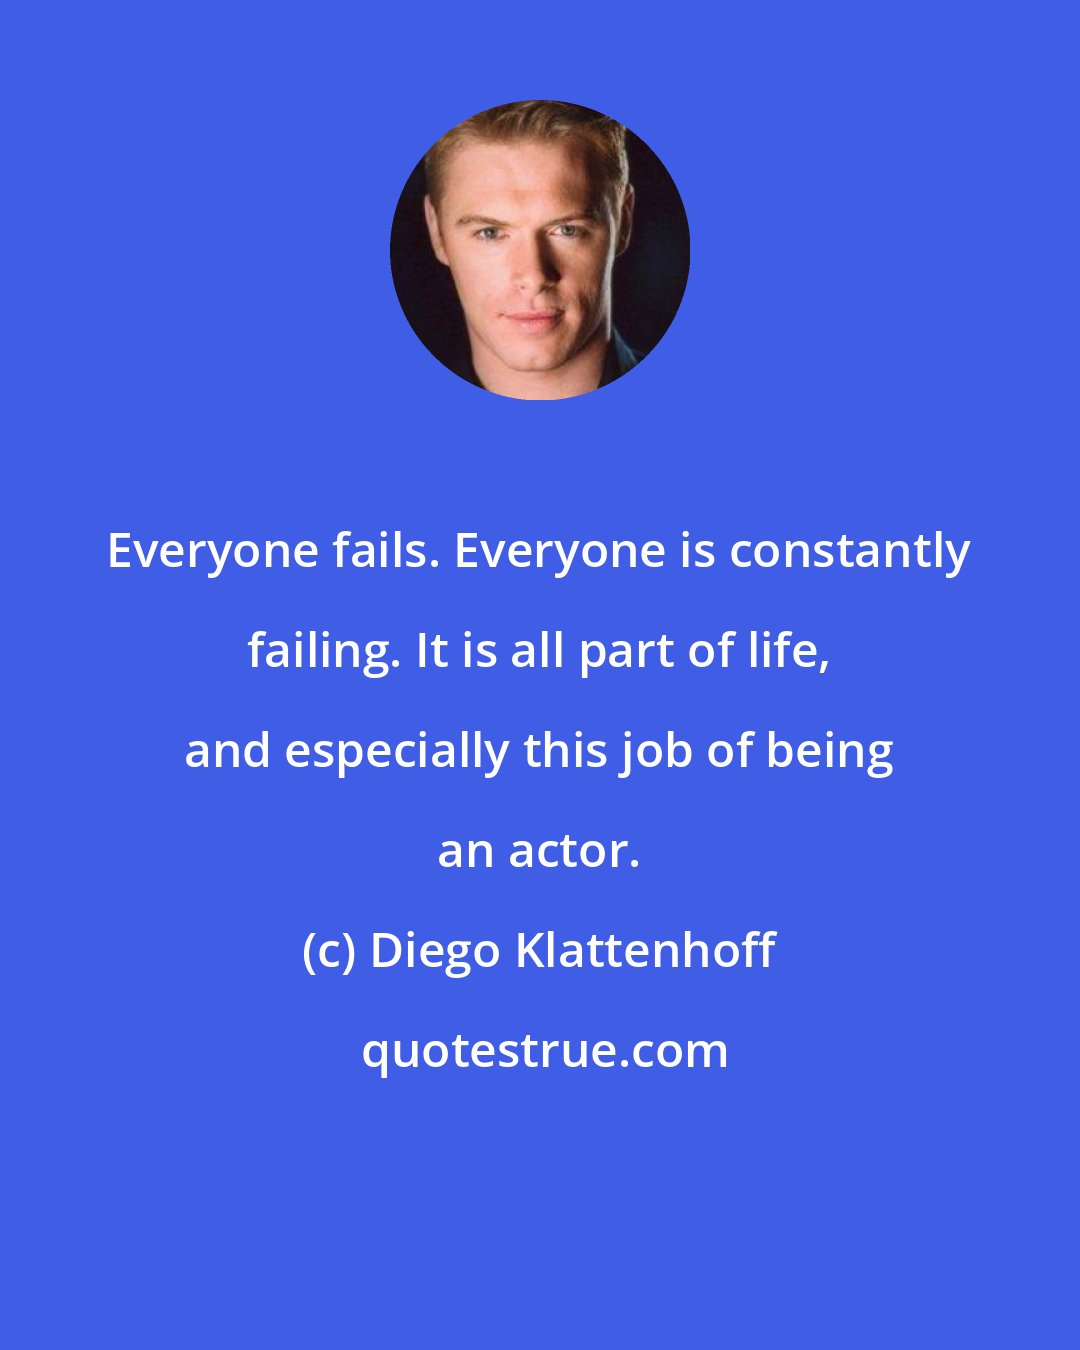 Diego Klattenhoff: Everyone fails. Everyone is constantly failing. It is all part of life, and especially this job of being an actor.